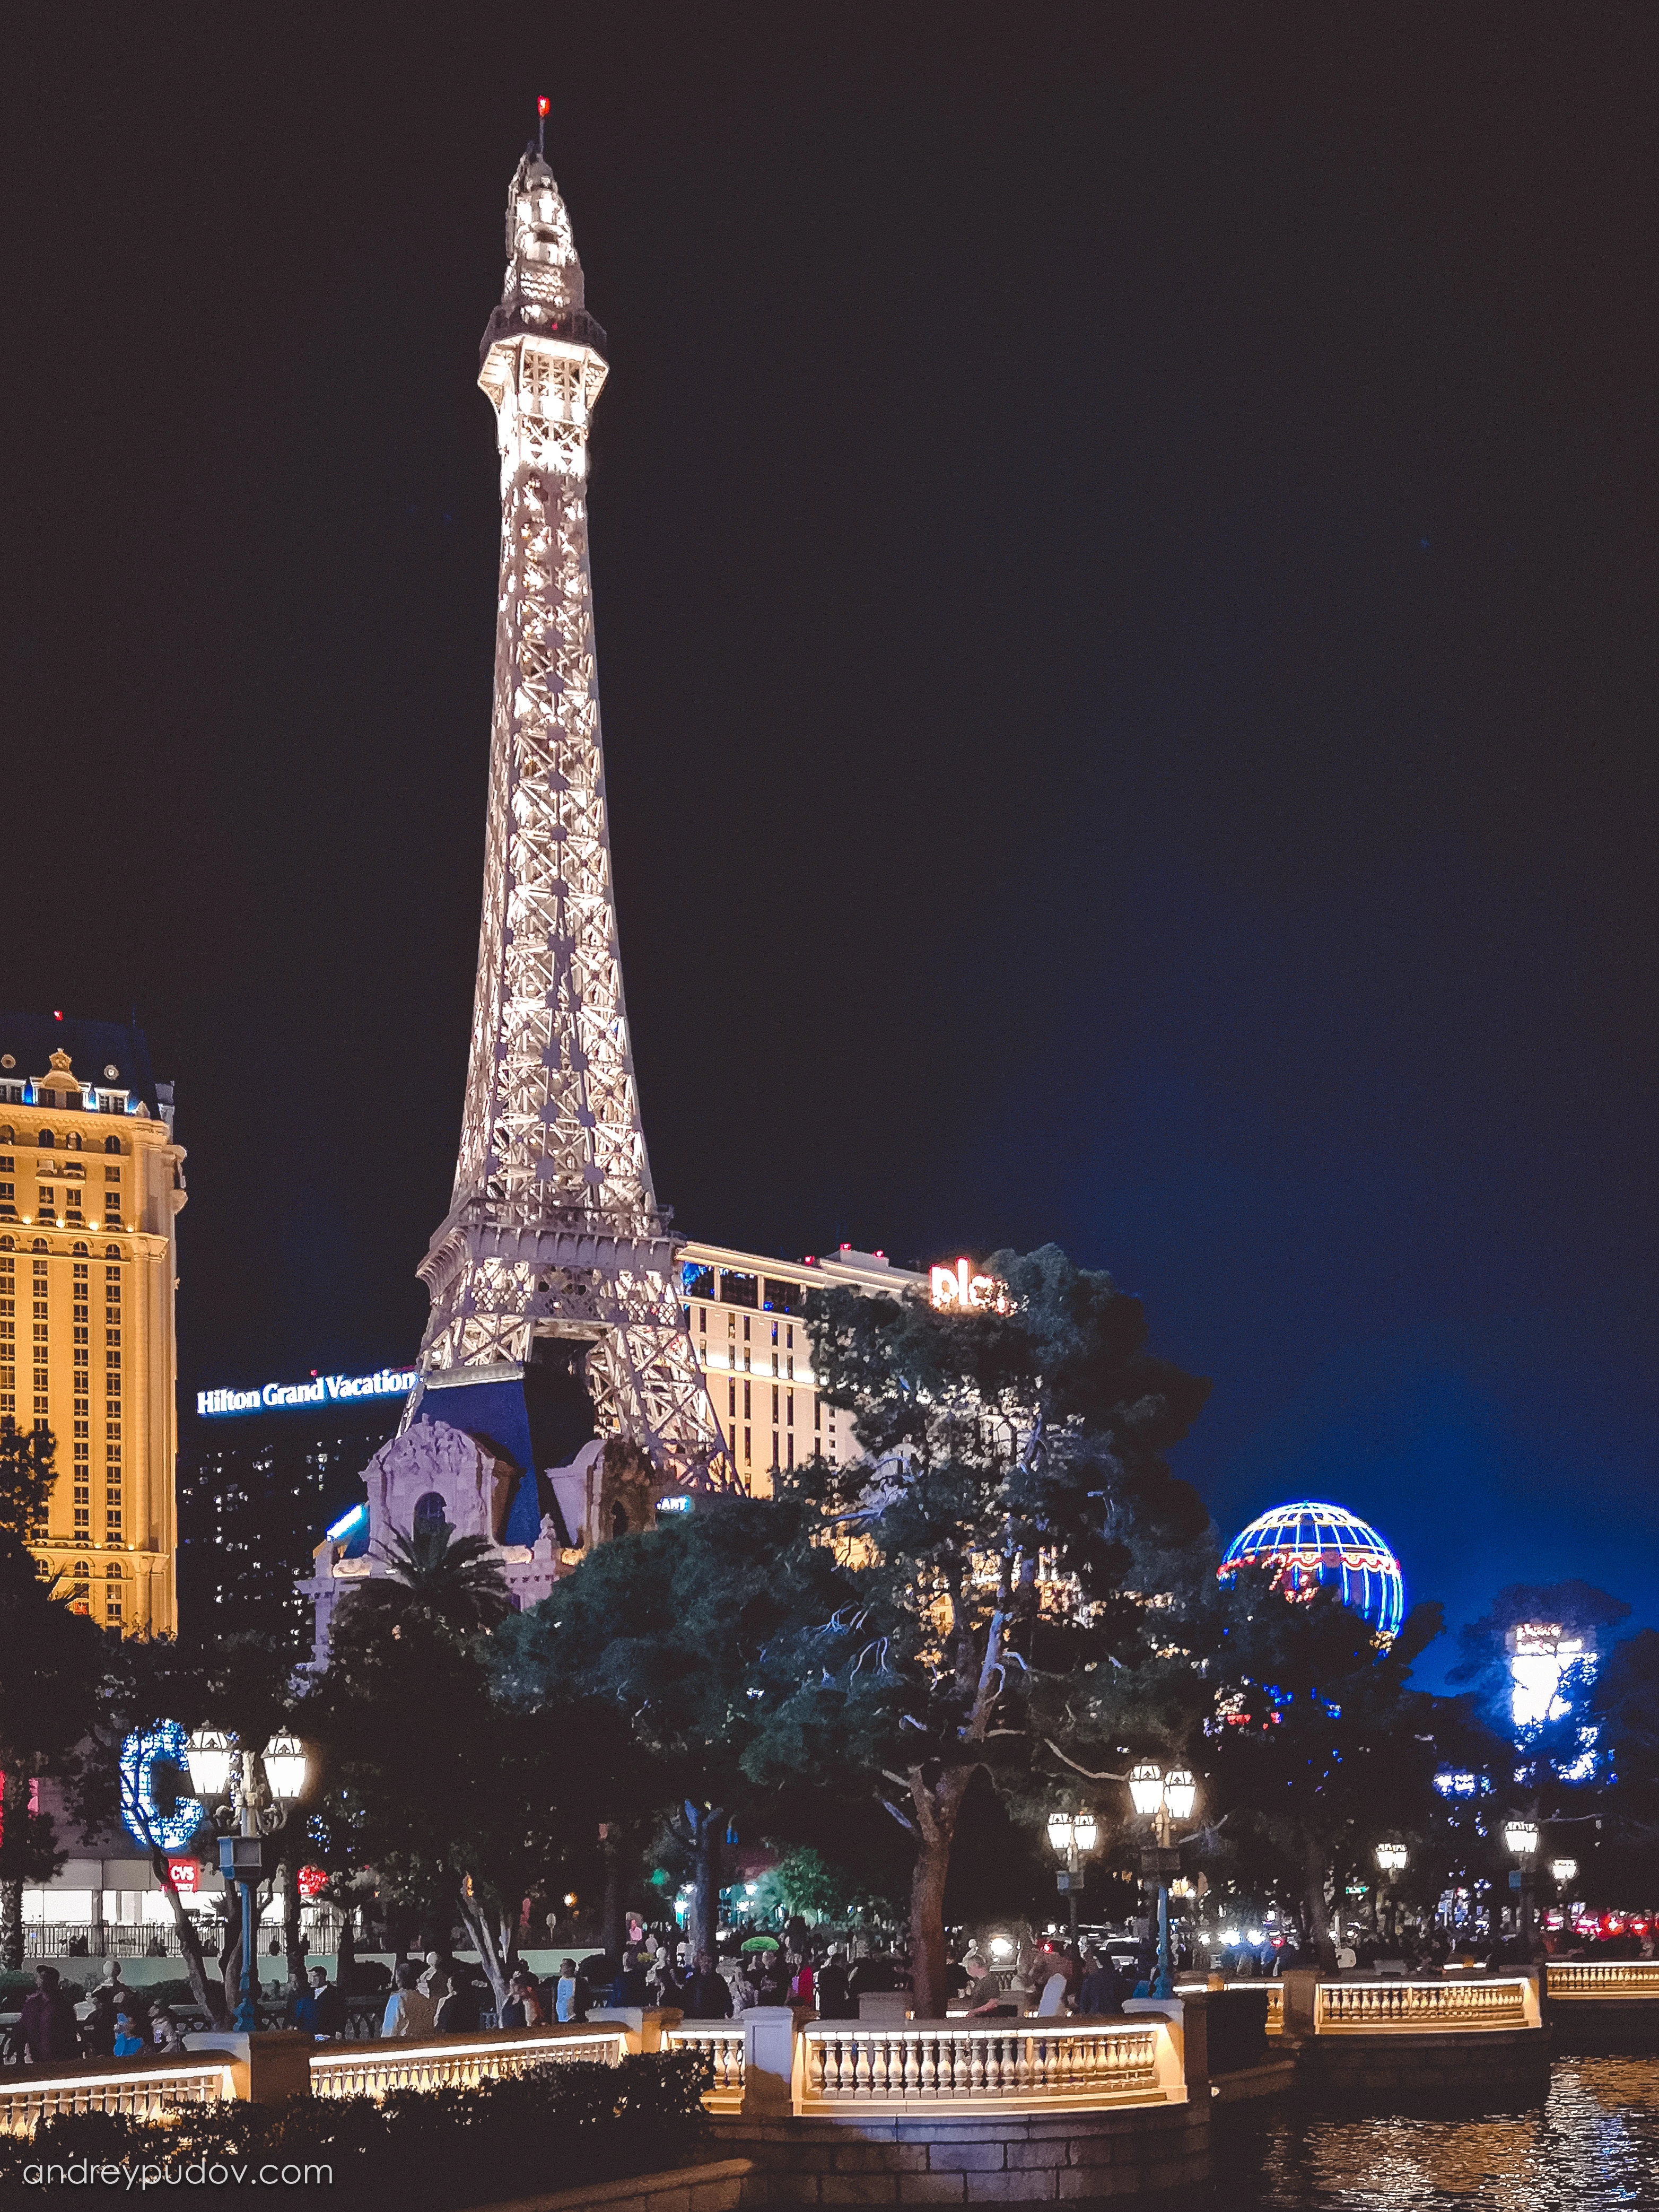 The Eiffel Tower

Construction began on the Paris Las Vegas Resort & Casino and its accompanying tower in 1997, with its completion taking place the following year. The Paris connects to its sister hotel, Bally’s, via tram. Initially, plans included a full-size replica of the famous Eiffel Tower, but due to flight path concerns from McCarran Airport, the tower had to be scaled down. Despite the reduction in its size, the Eiffel Tower in Las Vegas still offers the highest viewpoint of the Las Vegas Strip. At its architectural height, it stands over 12 meters taller than the High Roller Ferris wheel at the nearby LINQ. It’s become a popular place to celebrate Valentine’s Day, host a wedding, and, thanks to the Eiffel Tower Experience, take selfies.